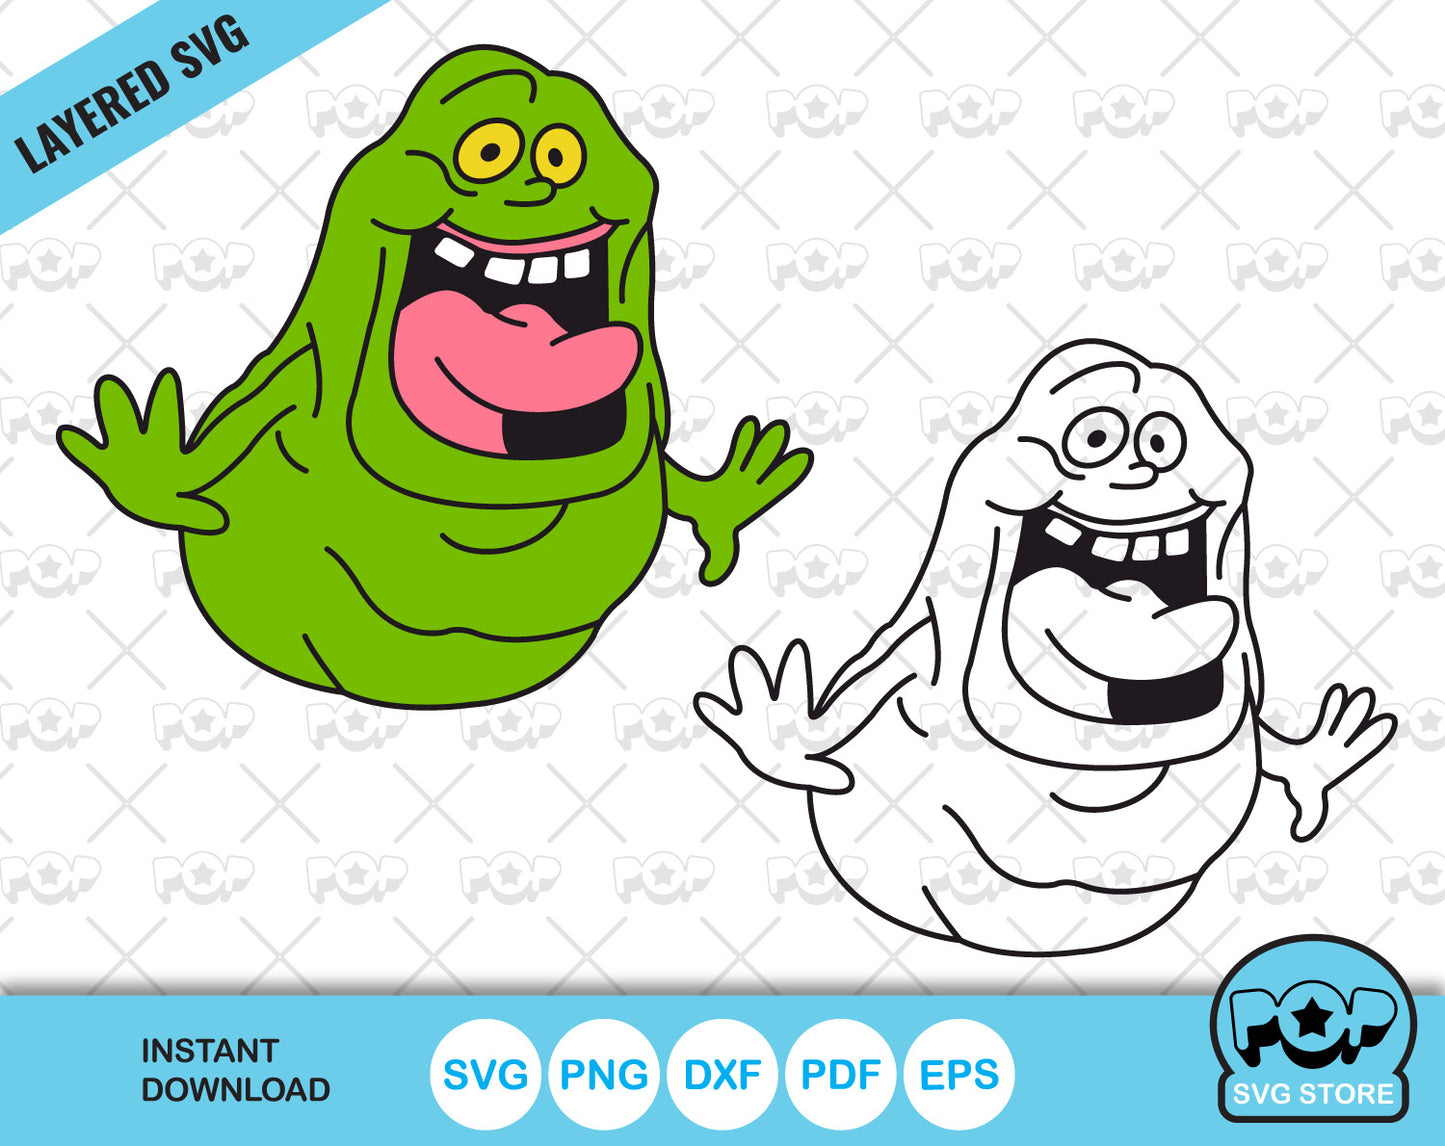 Ghostbusters Slimer clipart, SVG cutting files for Cricut / Silhouette, PNG, DXF, instant download